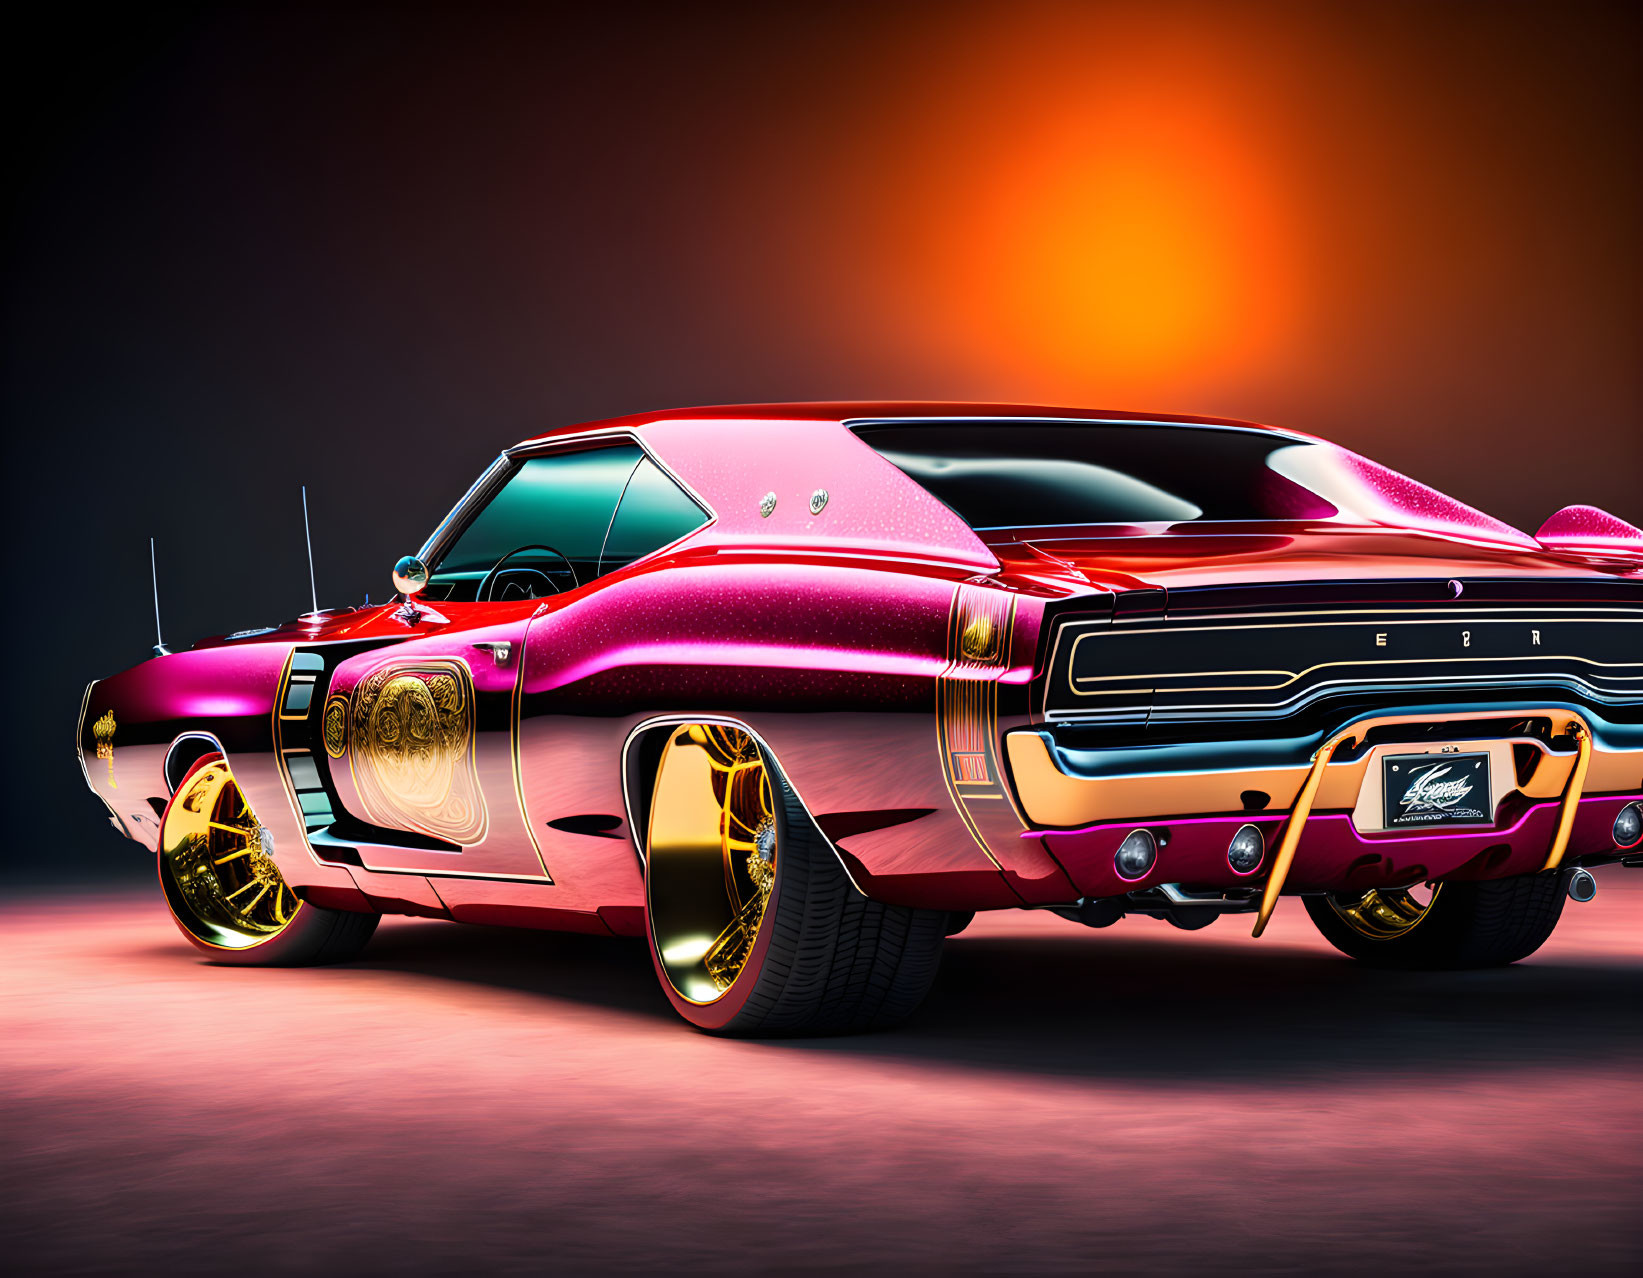 Vibrant pink muscle car with golden rims under dramatic lighting